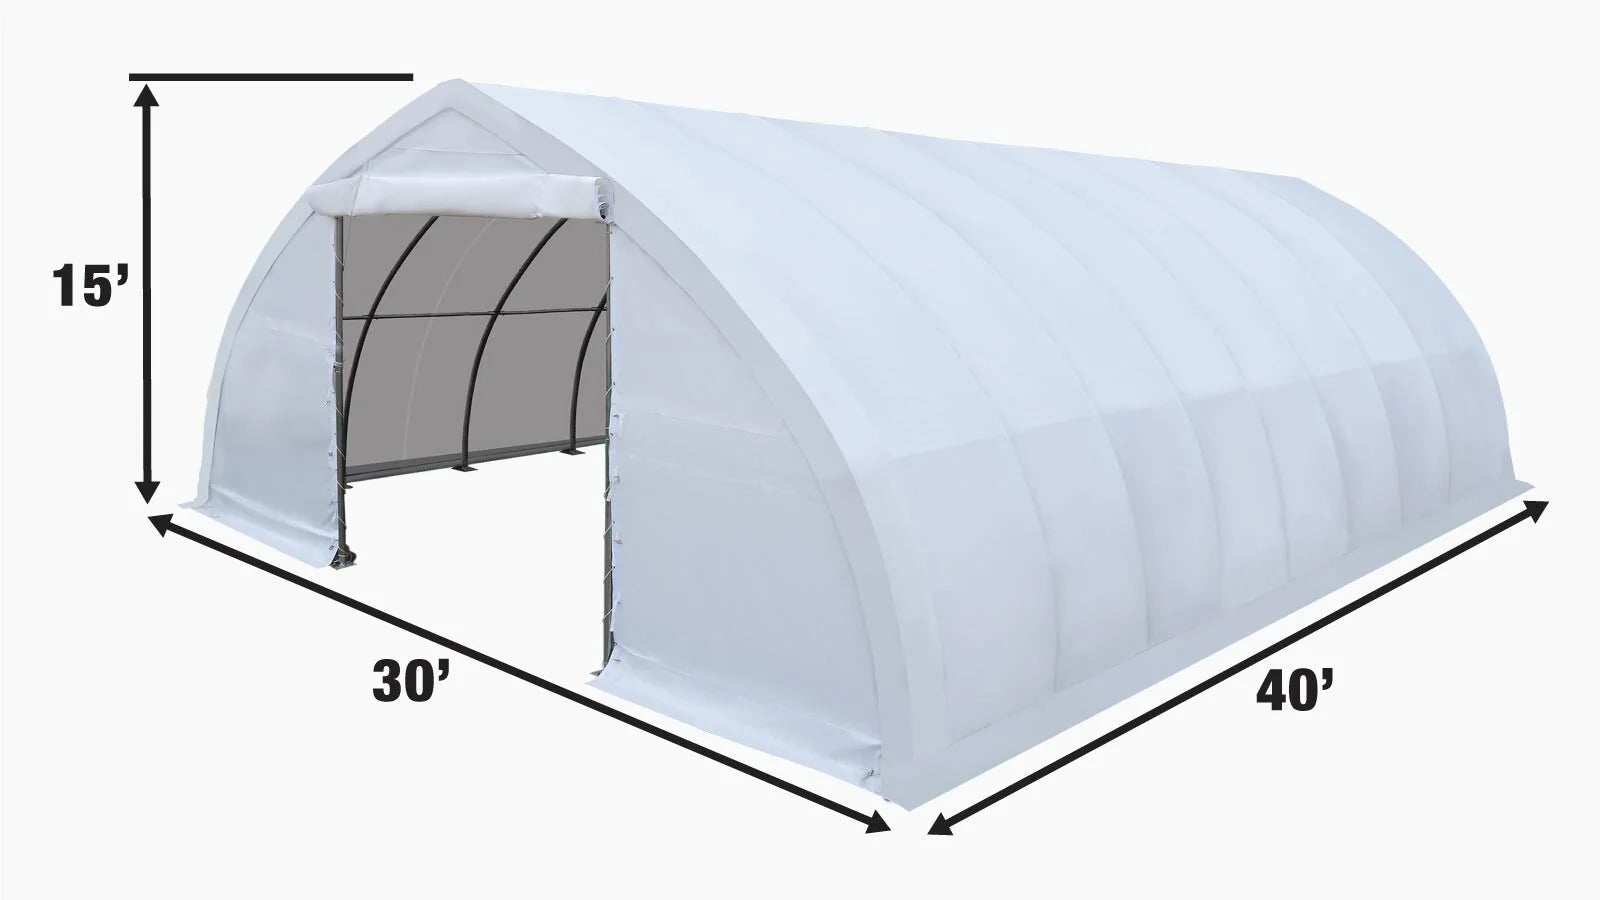 TMG Industrial 30' x 40' Peak Ceiling Storage Shelter with Heavy Duty 11 oz PE Cover & Drive Through Doors, TMG-ST3040E (Previously ST3040)-specifications-image